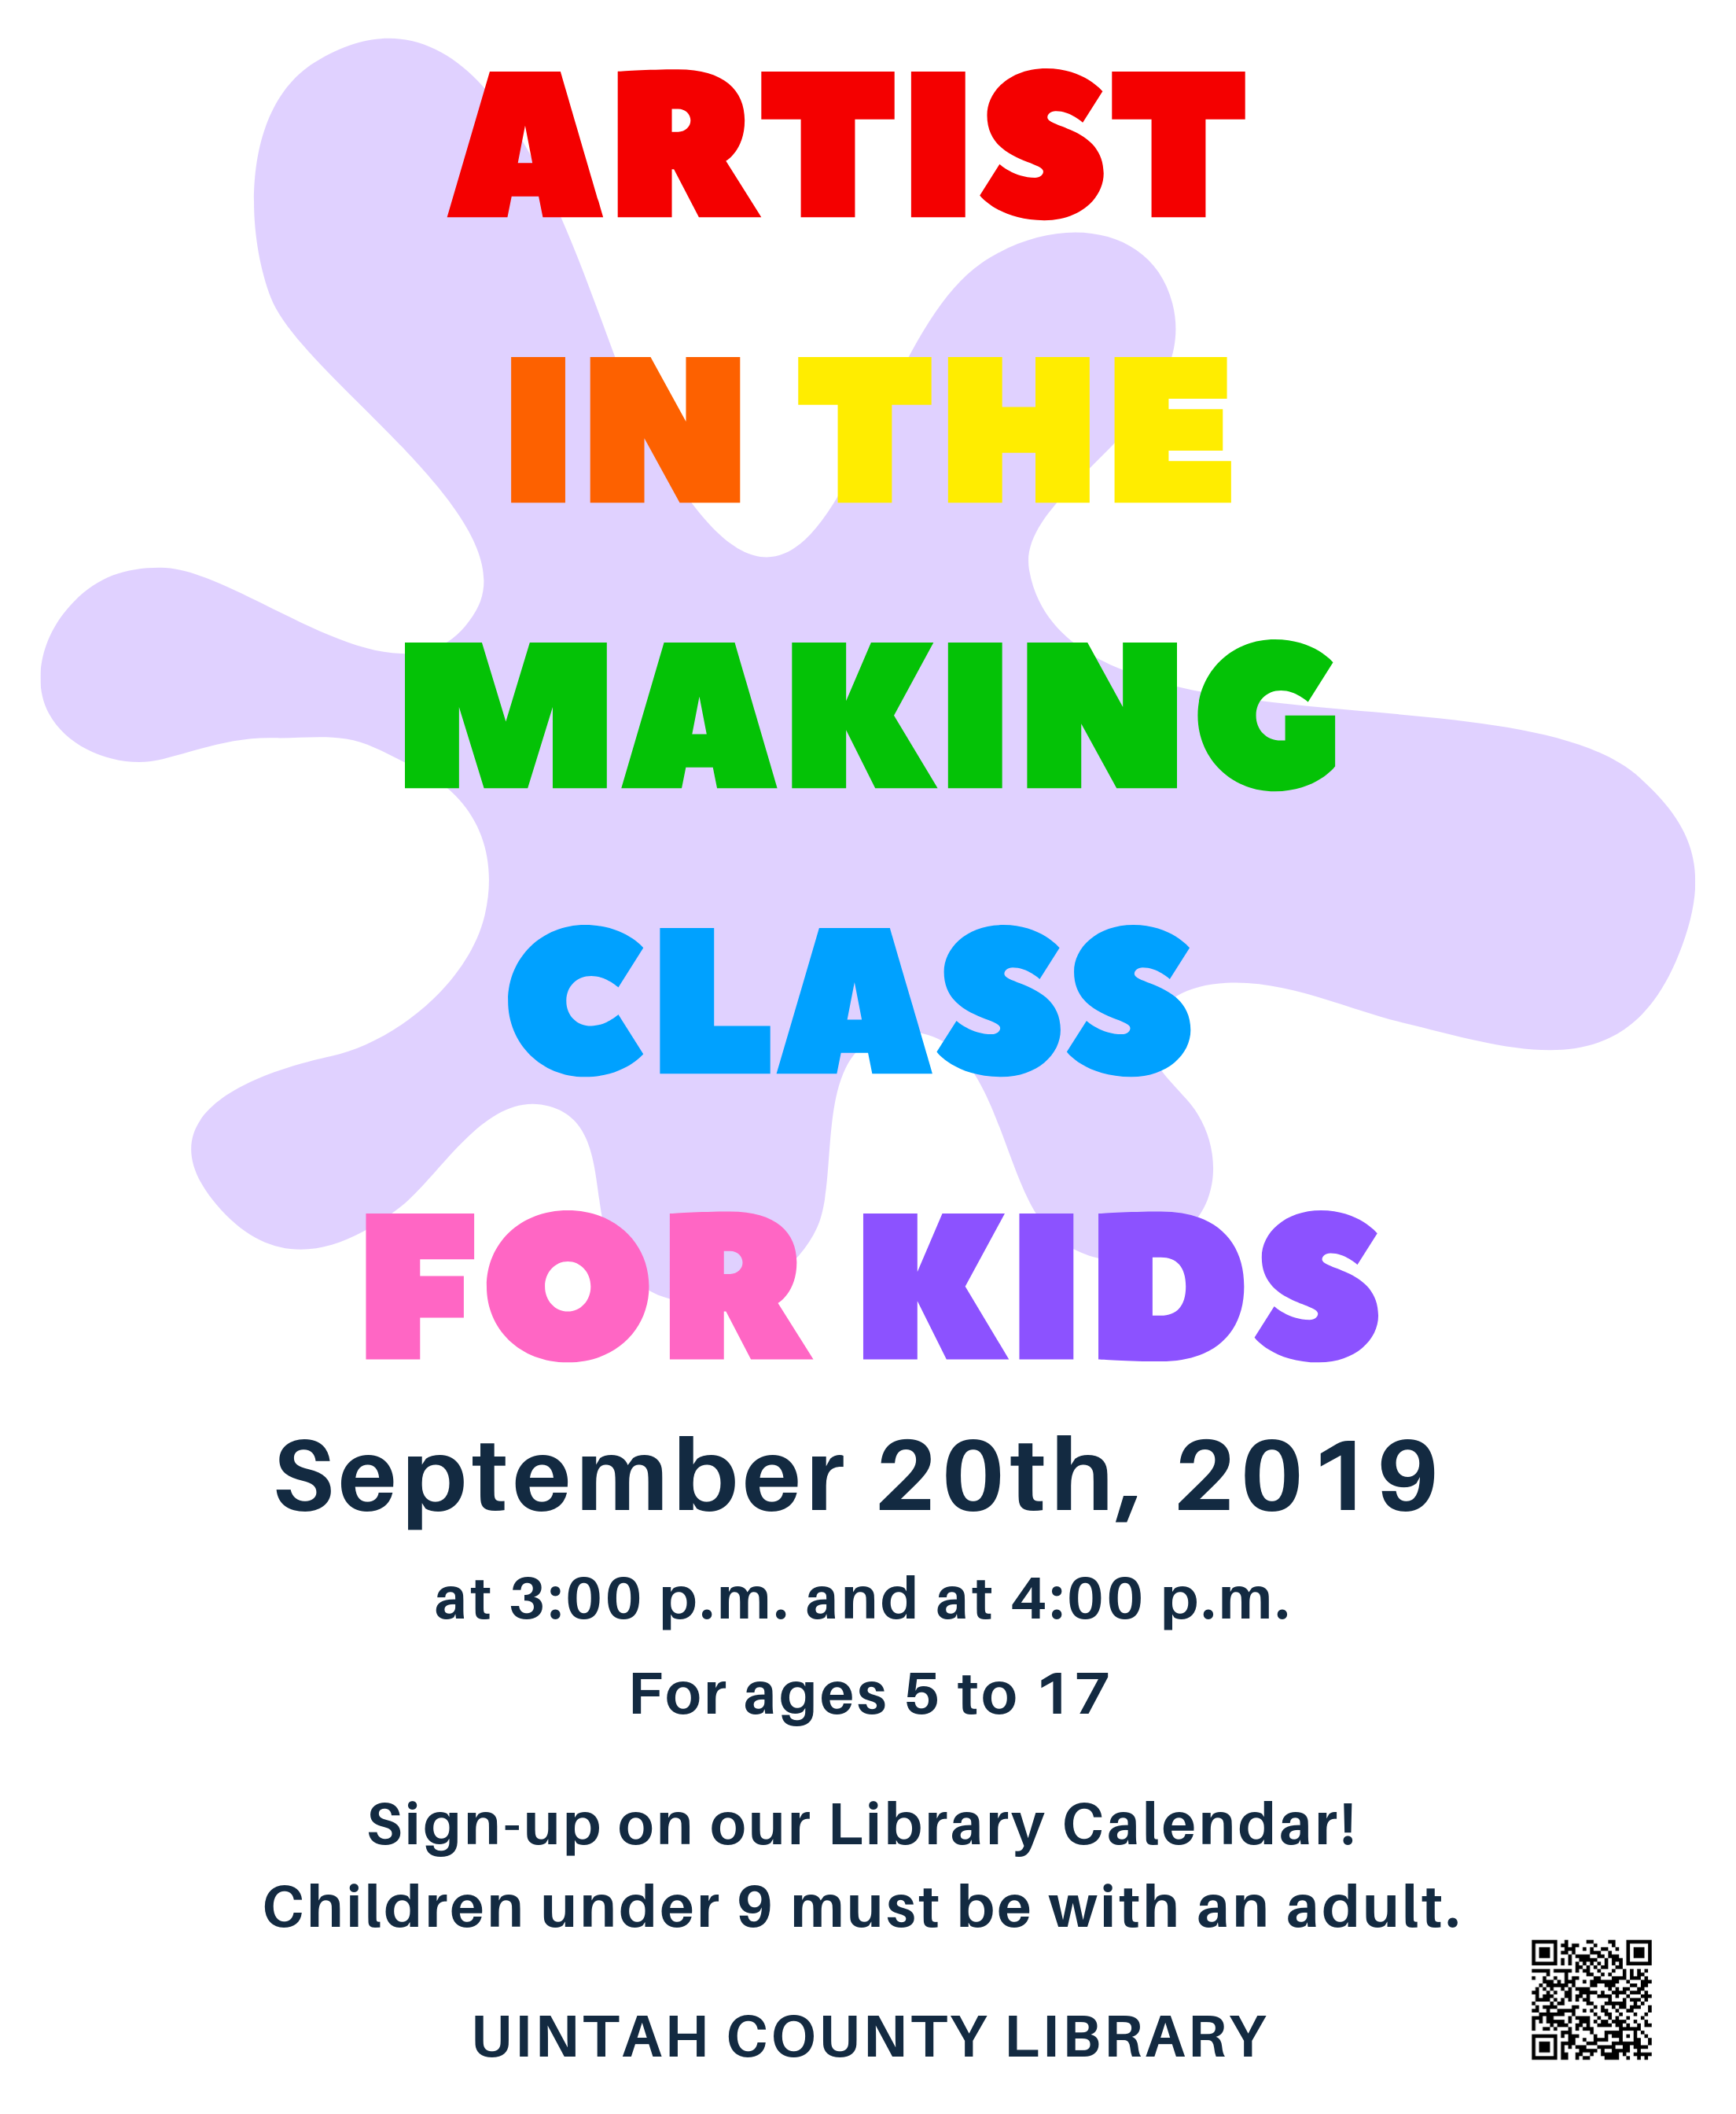 Image contains text: Artist in the Making Class For Kids September 20th, 2019 at 3:00 p.m. and at 4:00 p.m. For ages 5 to 17 Sign-up on our Library Calendar! Children under 9 must be with an adult. Uintah County Library. Image also includes paint splatter clipart and a QR code. 